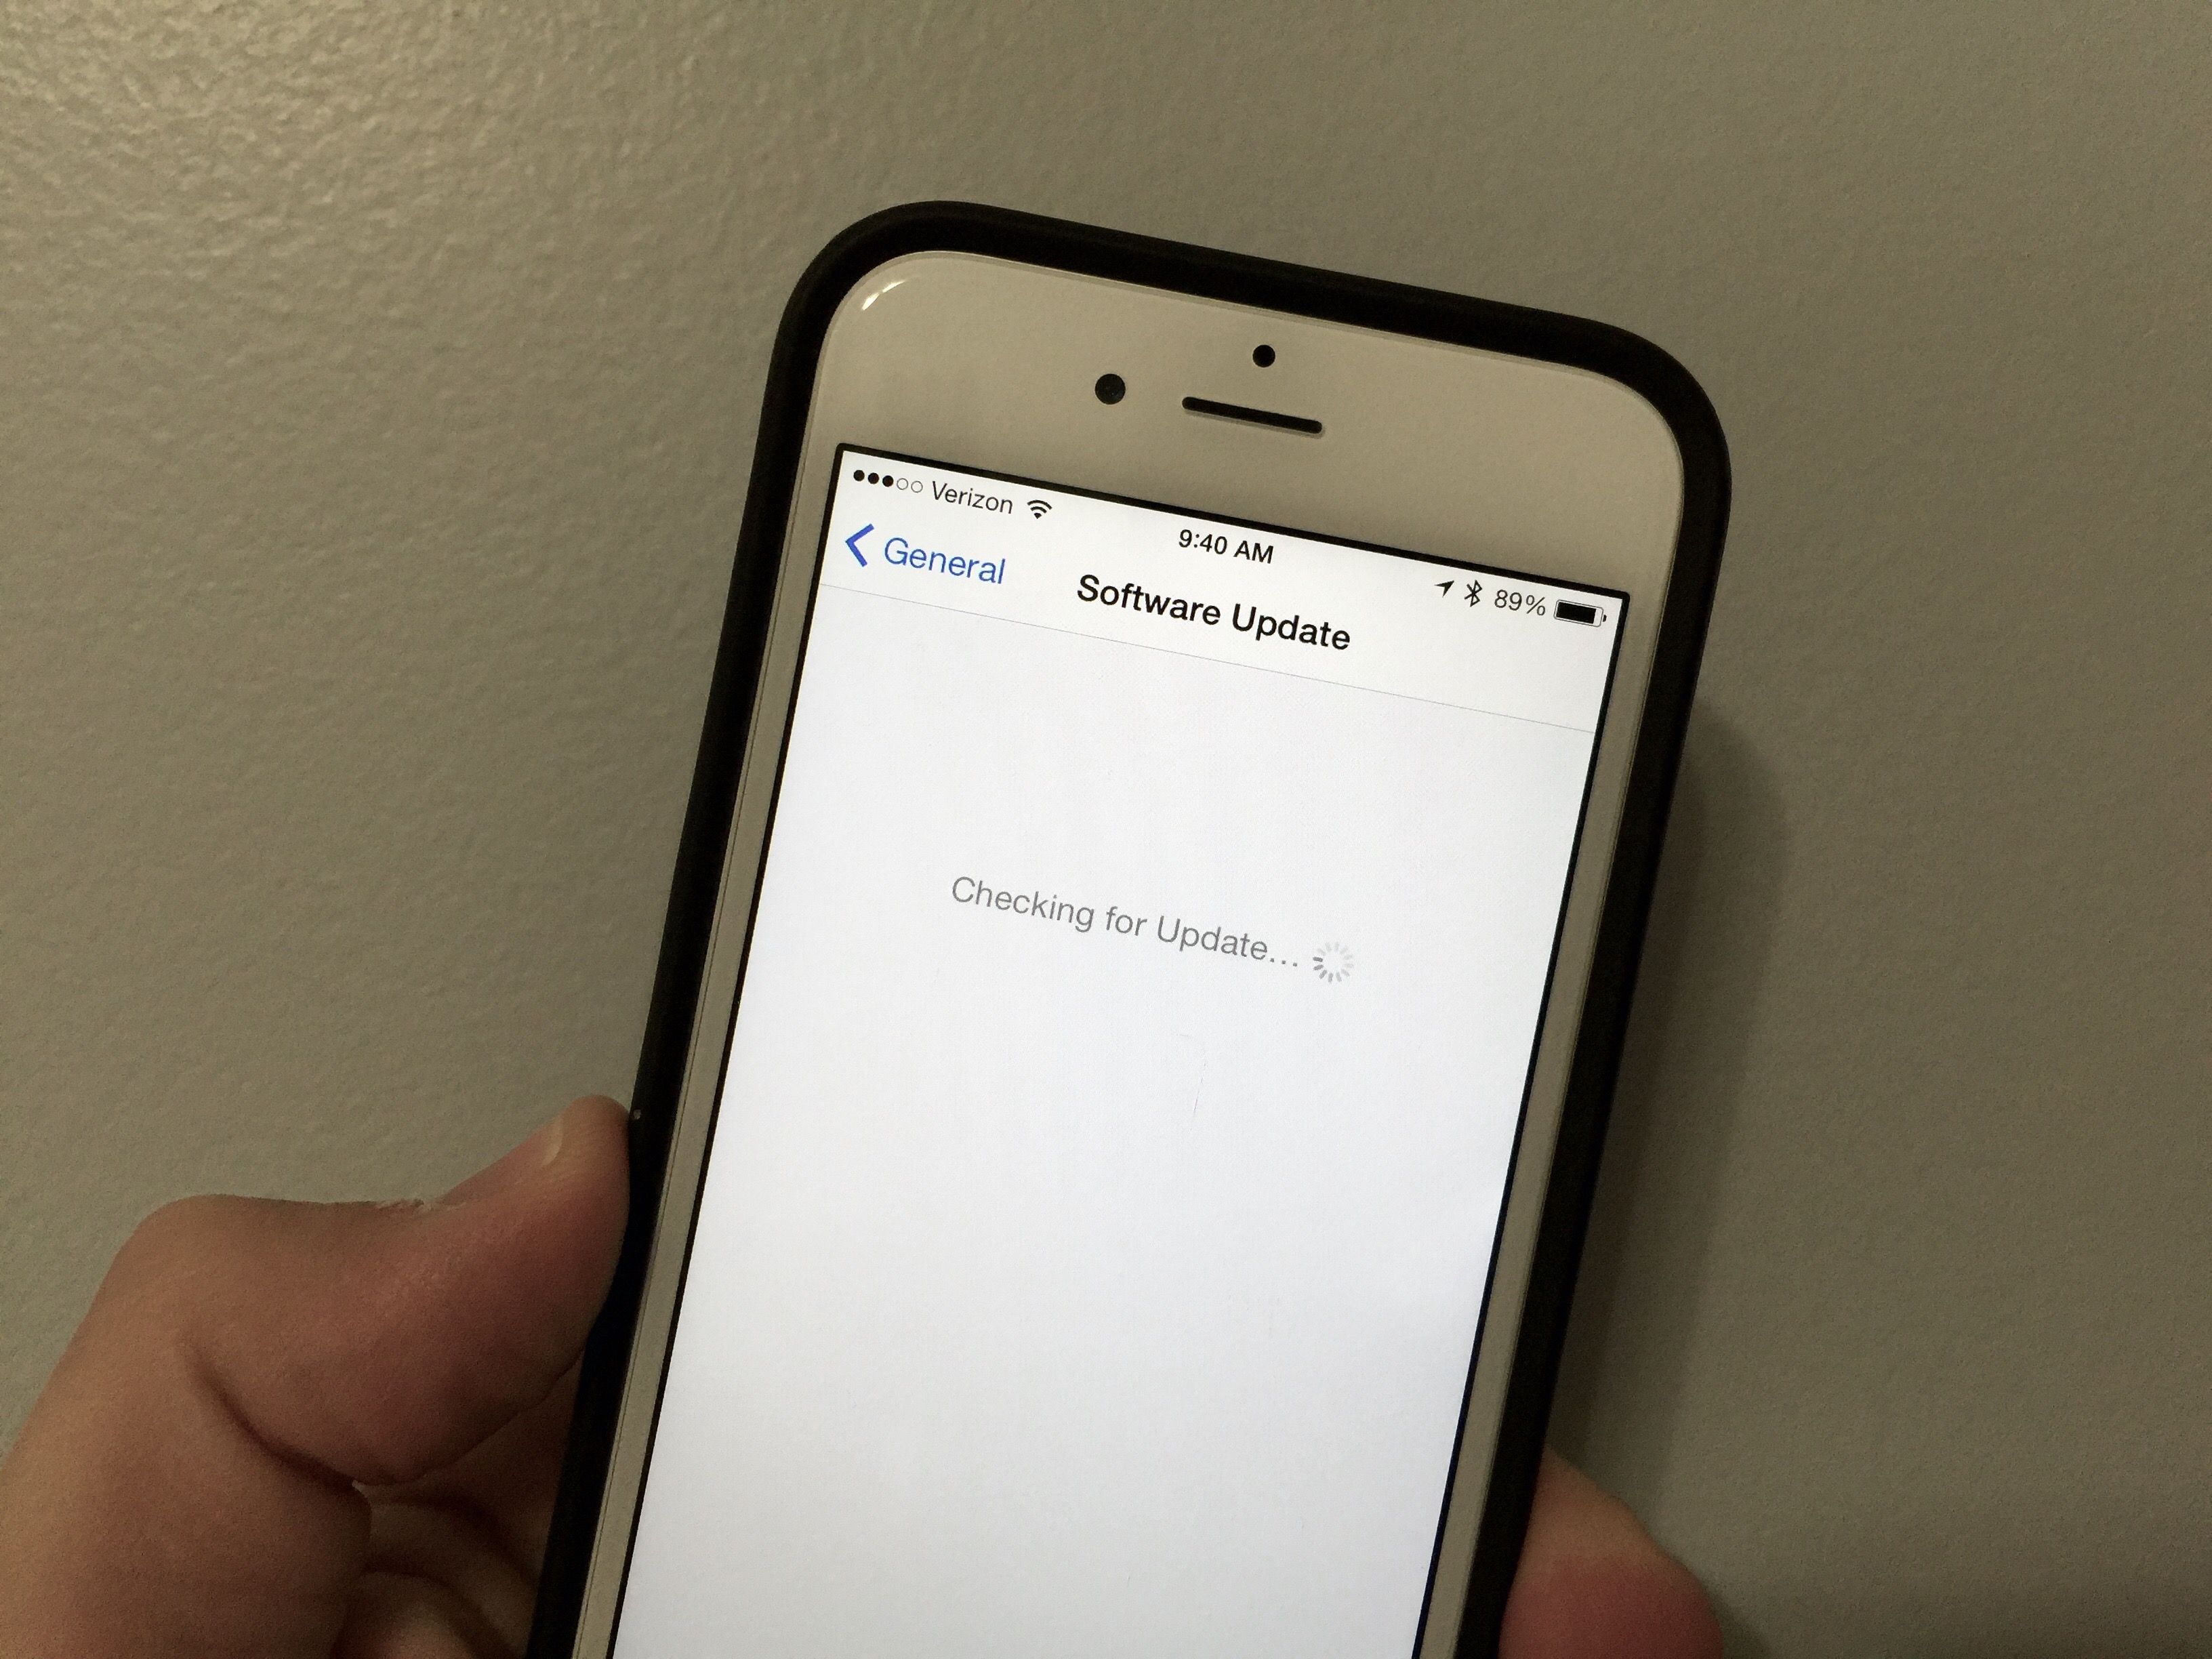 Learn what you need to know about performing an iOS 8.4 install on iphone or iPad.